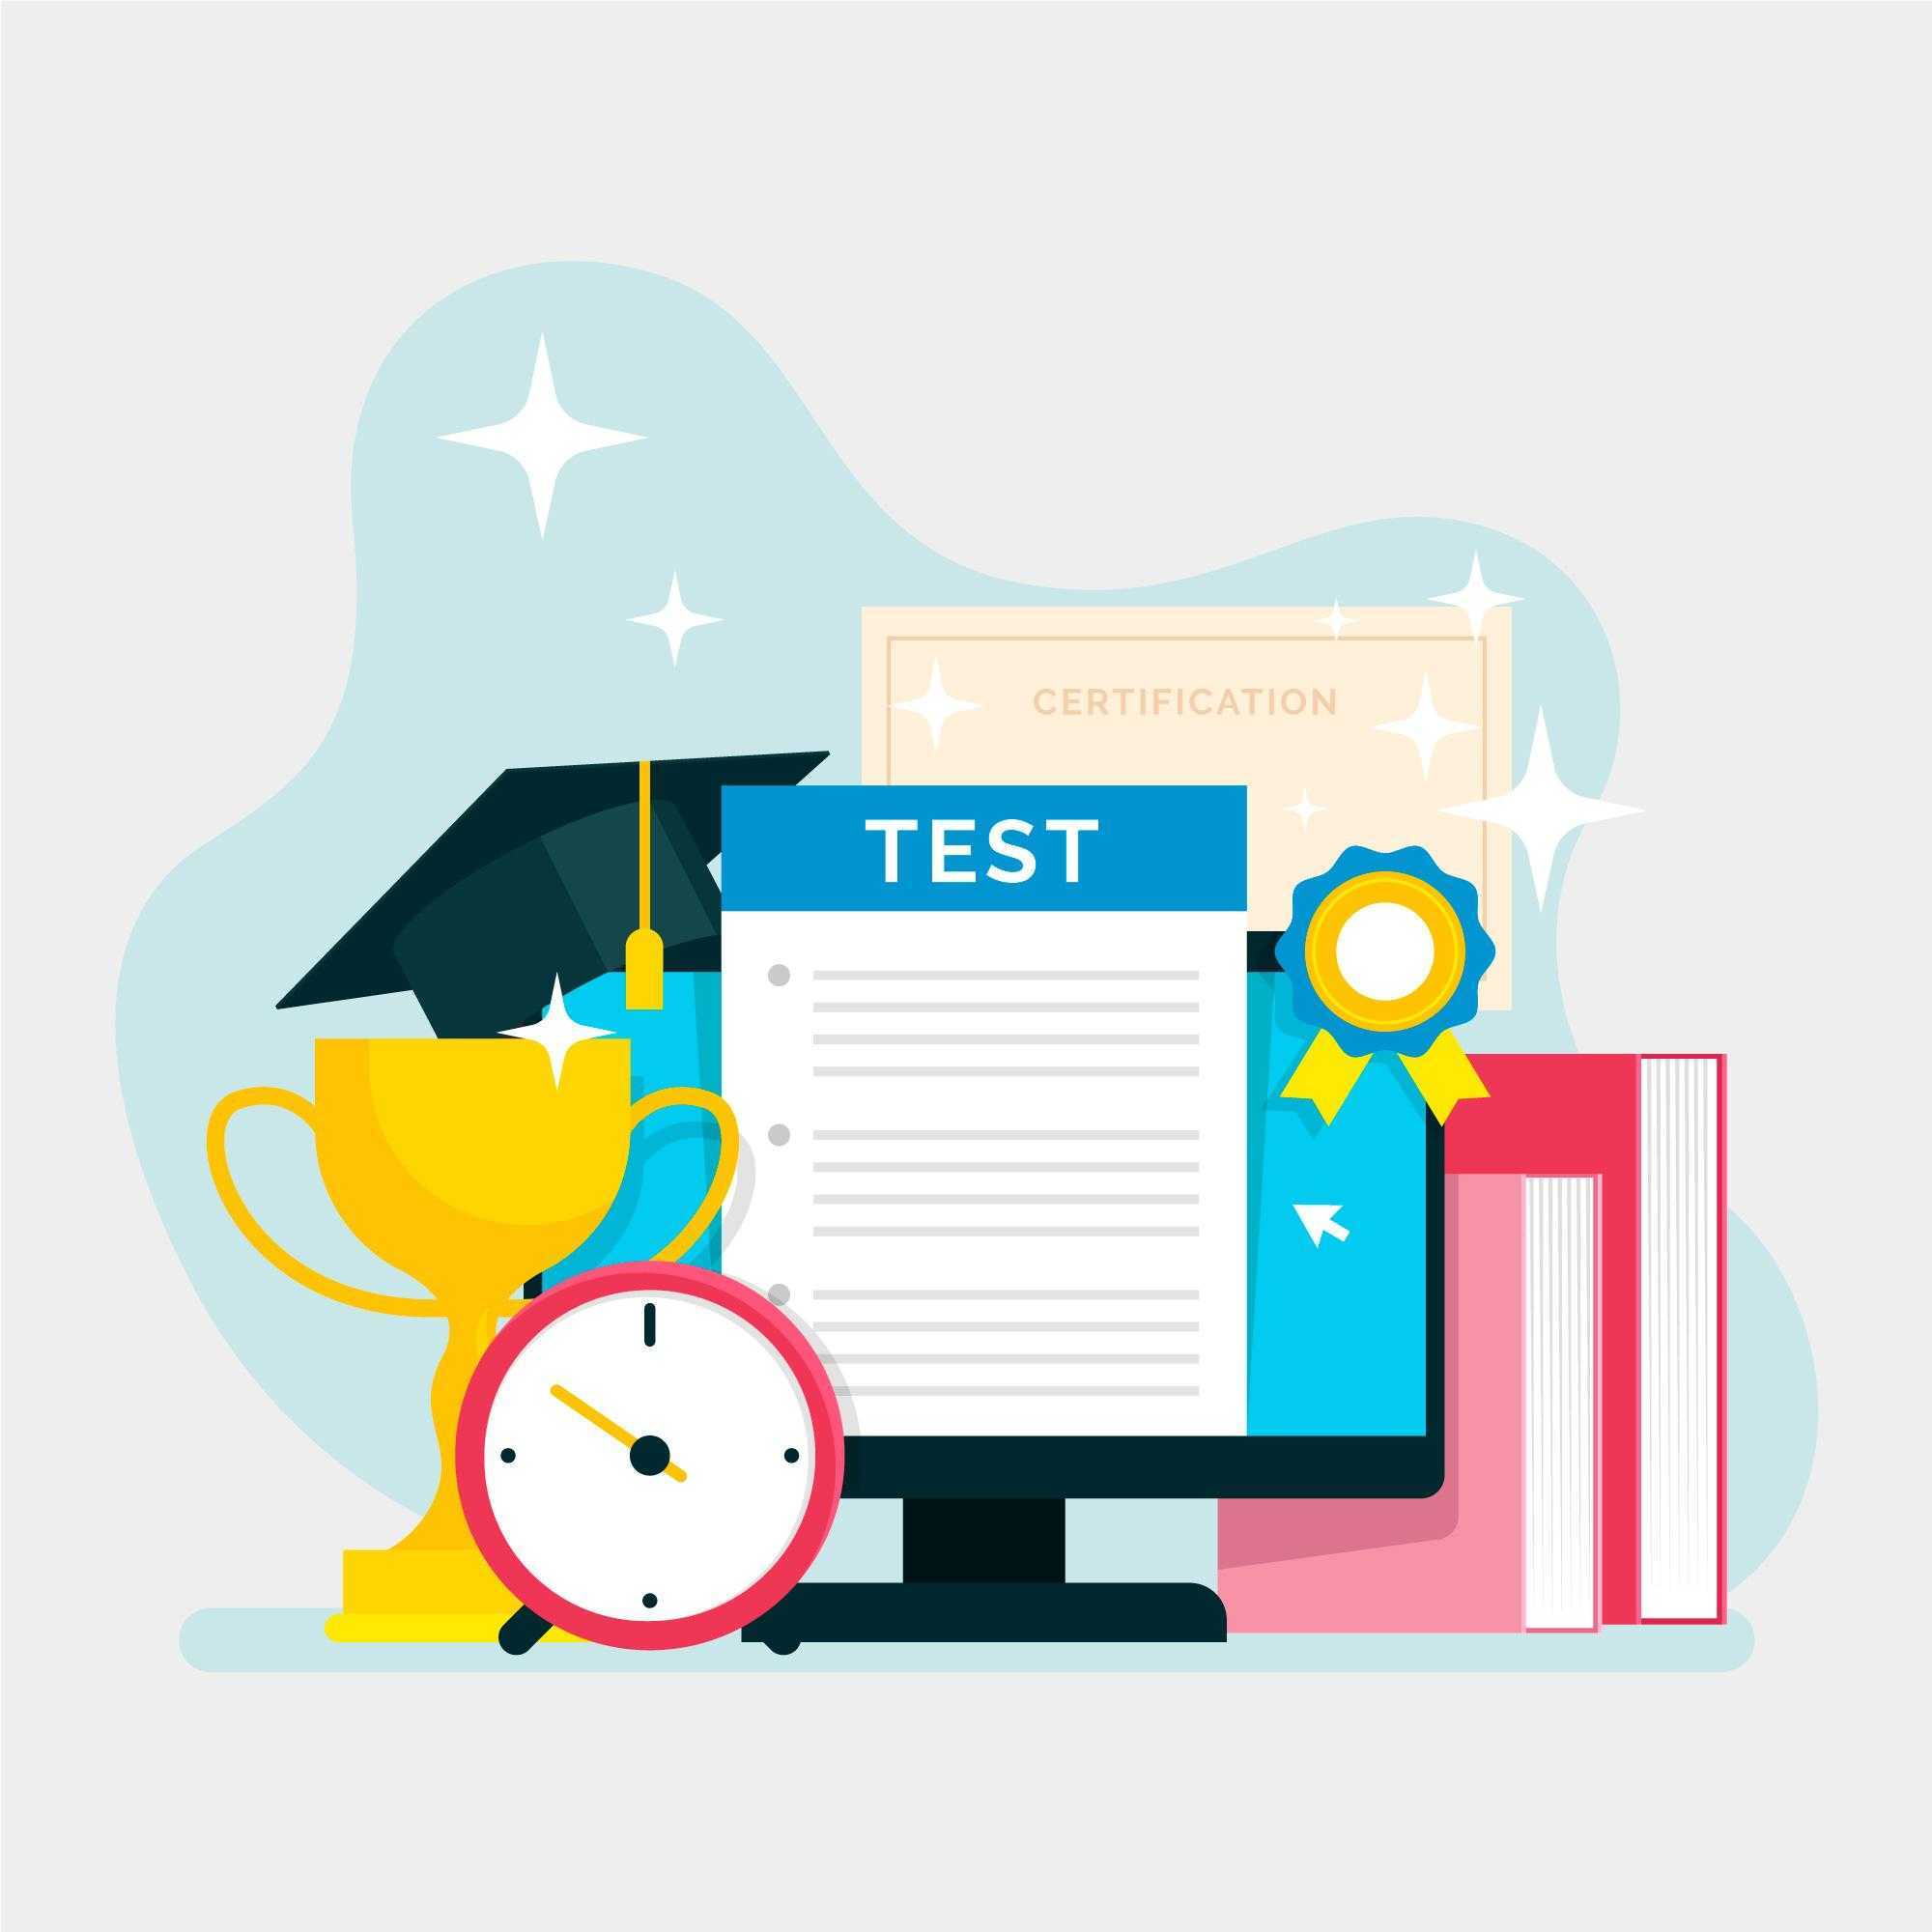 certificate and test vector illustration